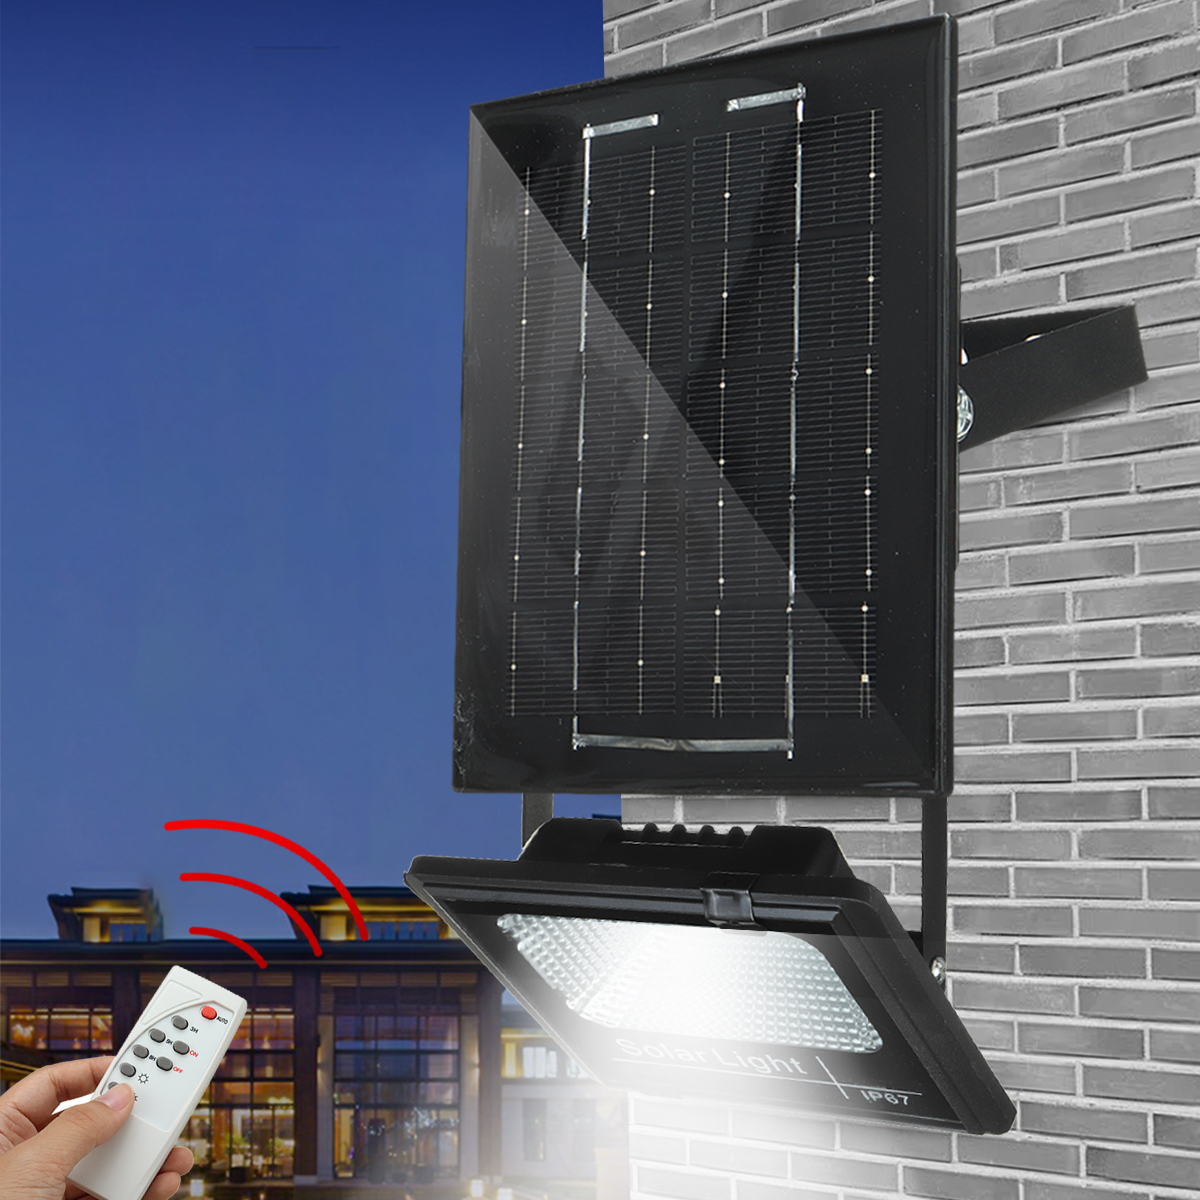 LED-Solar-Flood-Light-with-Remote-Control-Wall-Lamp-IP67-Waterproof-Solar-Powered-Lamp-for-Outdoor-G-1880477-5